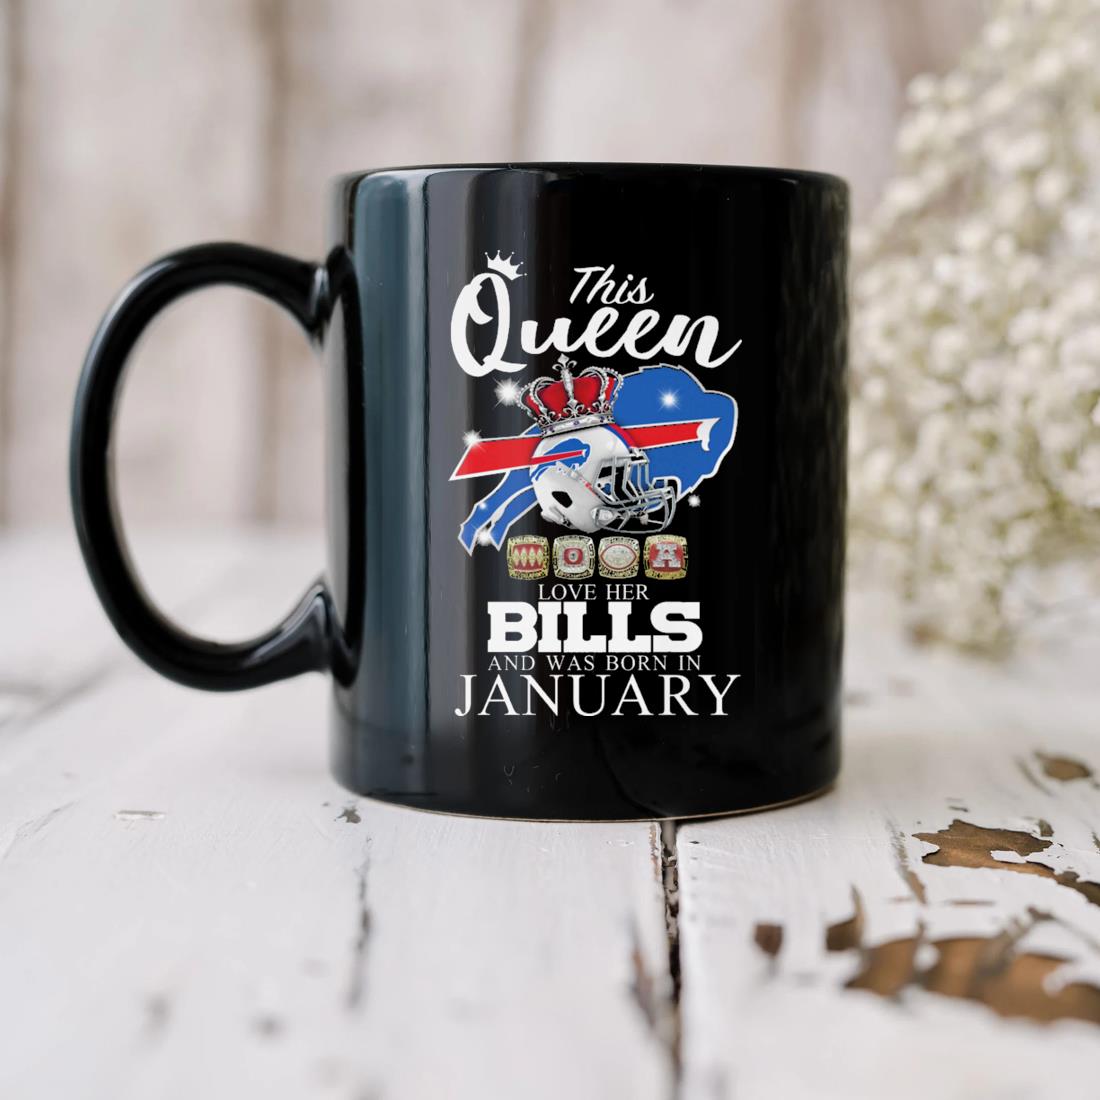 This Queen Love Her Bills And Was Born In January Mug